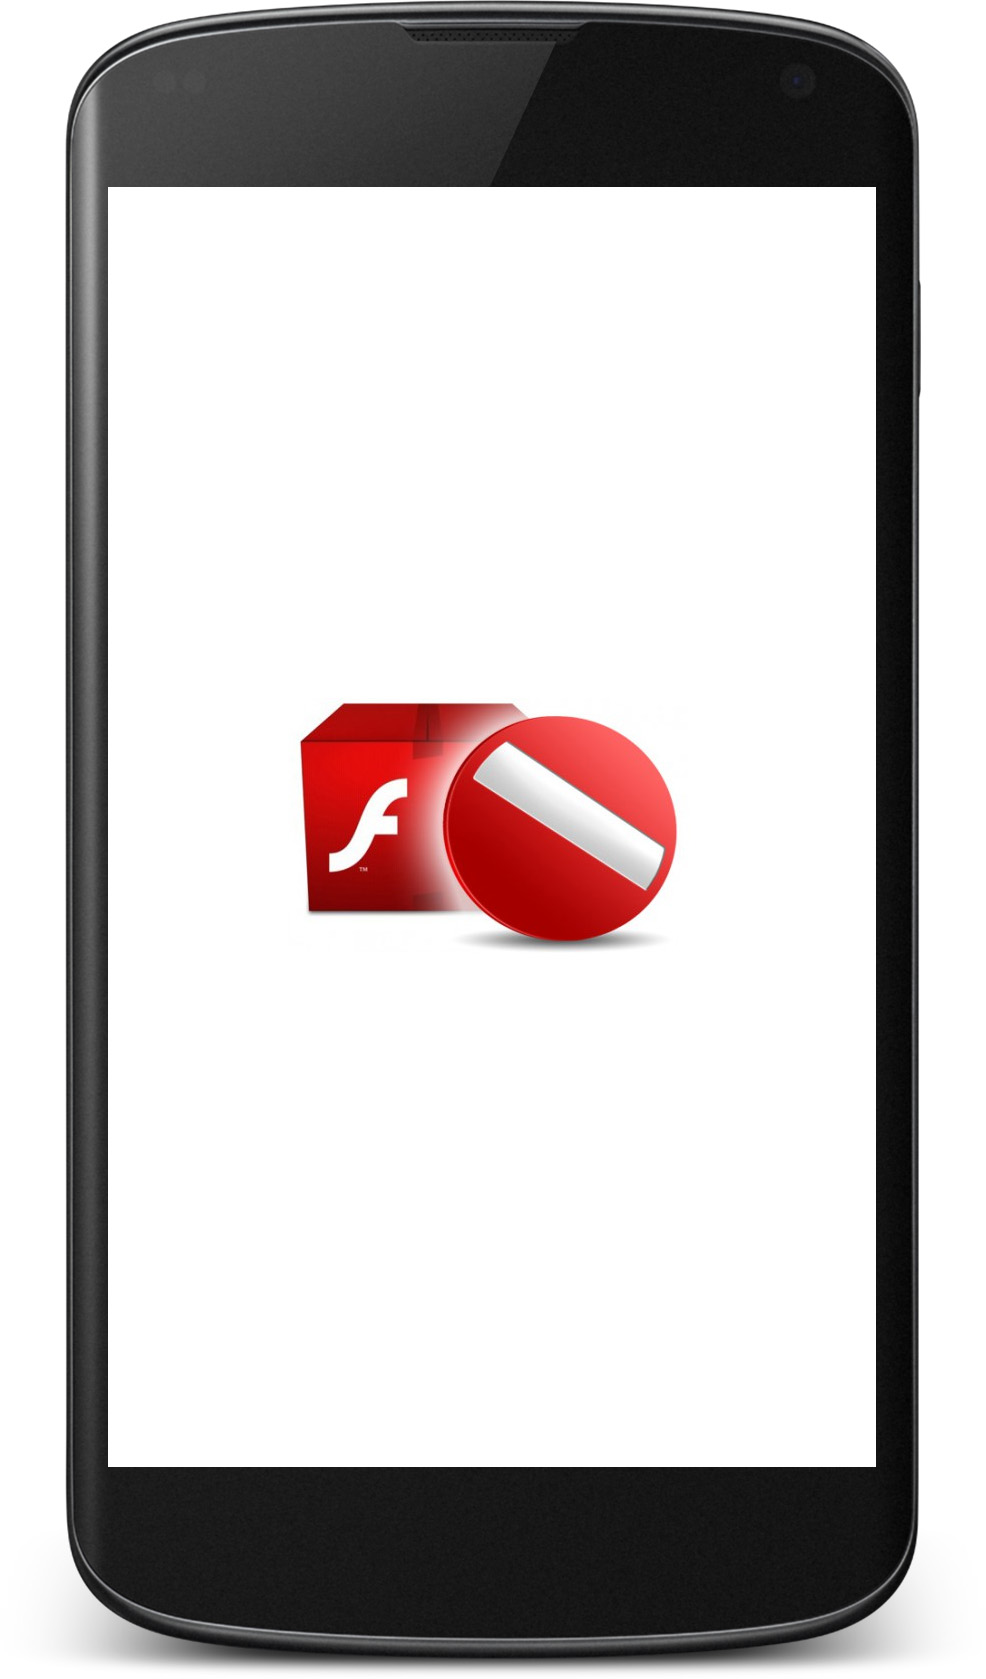 adobe flash player apk for pc